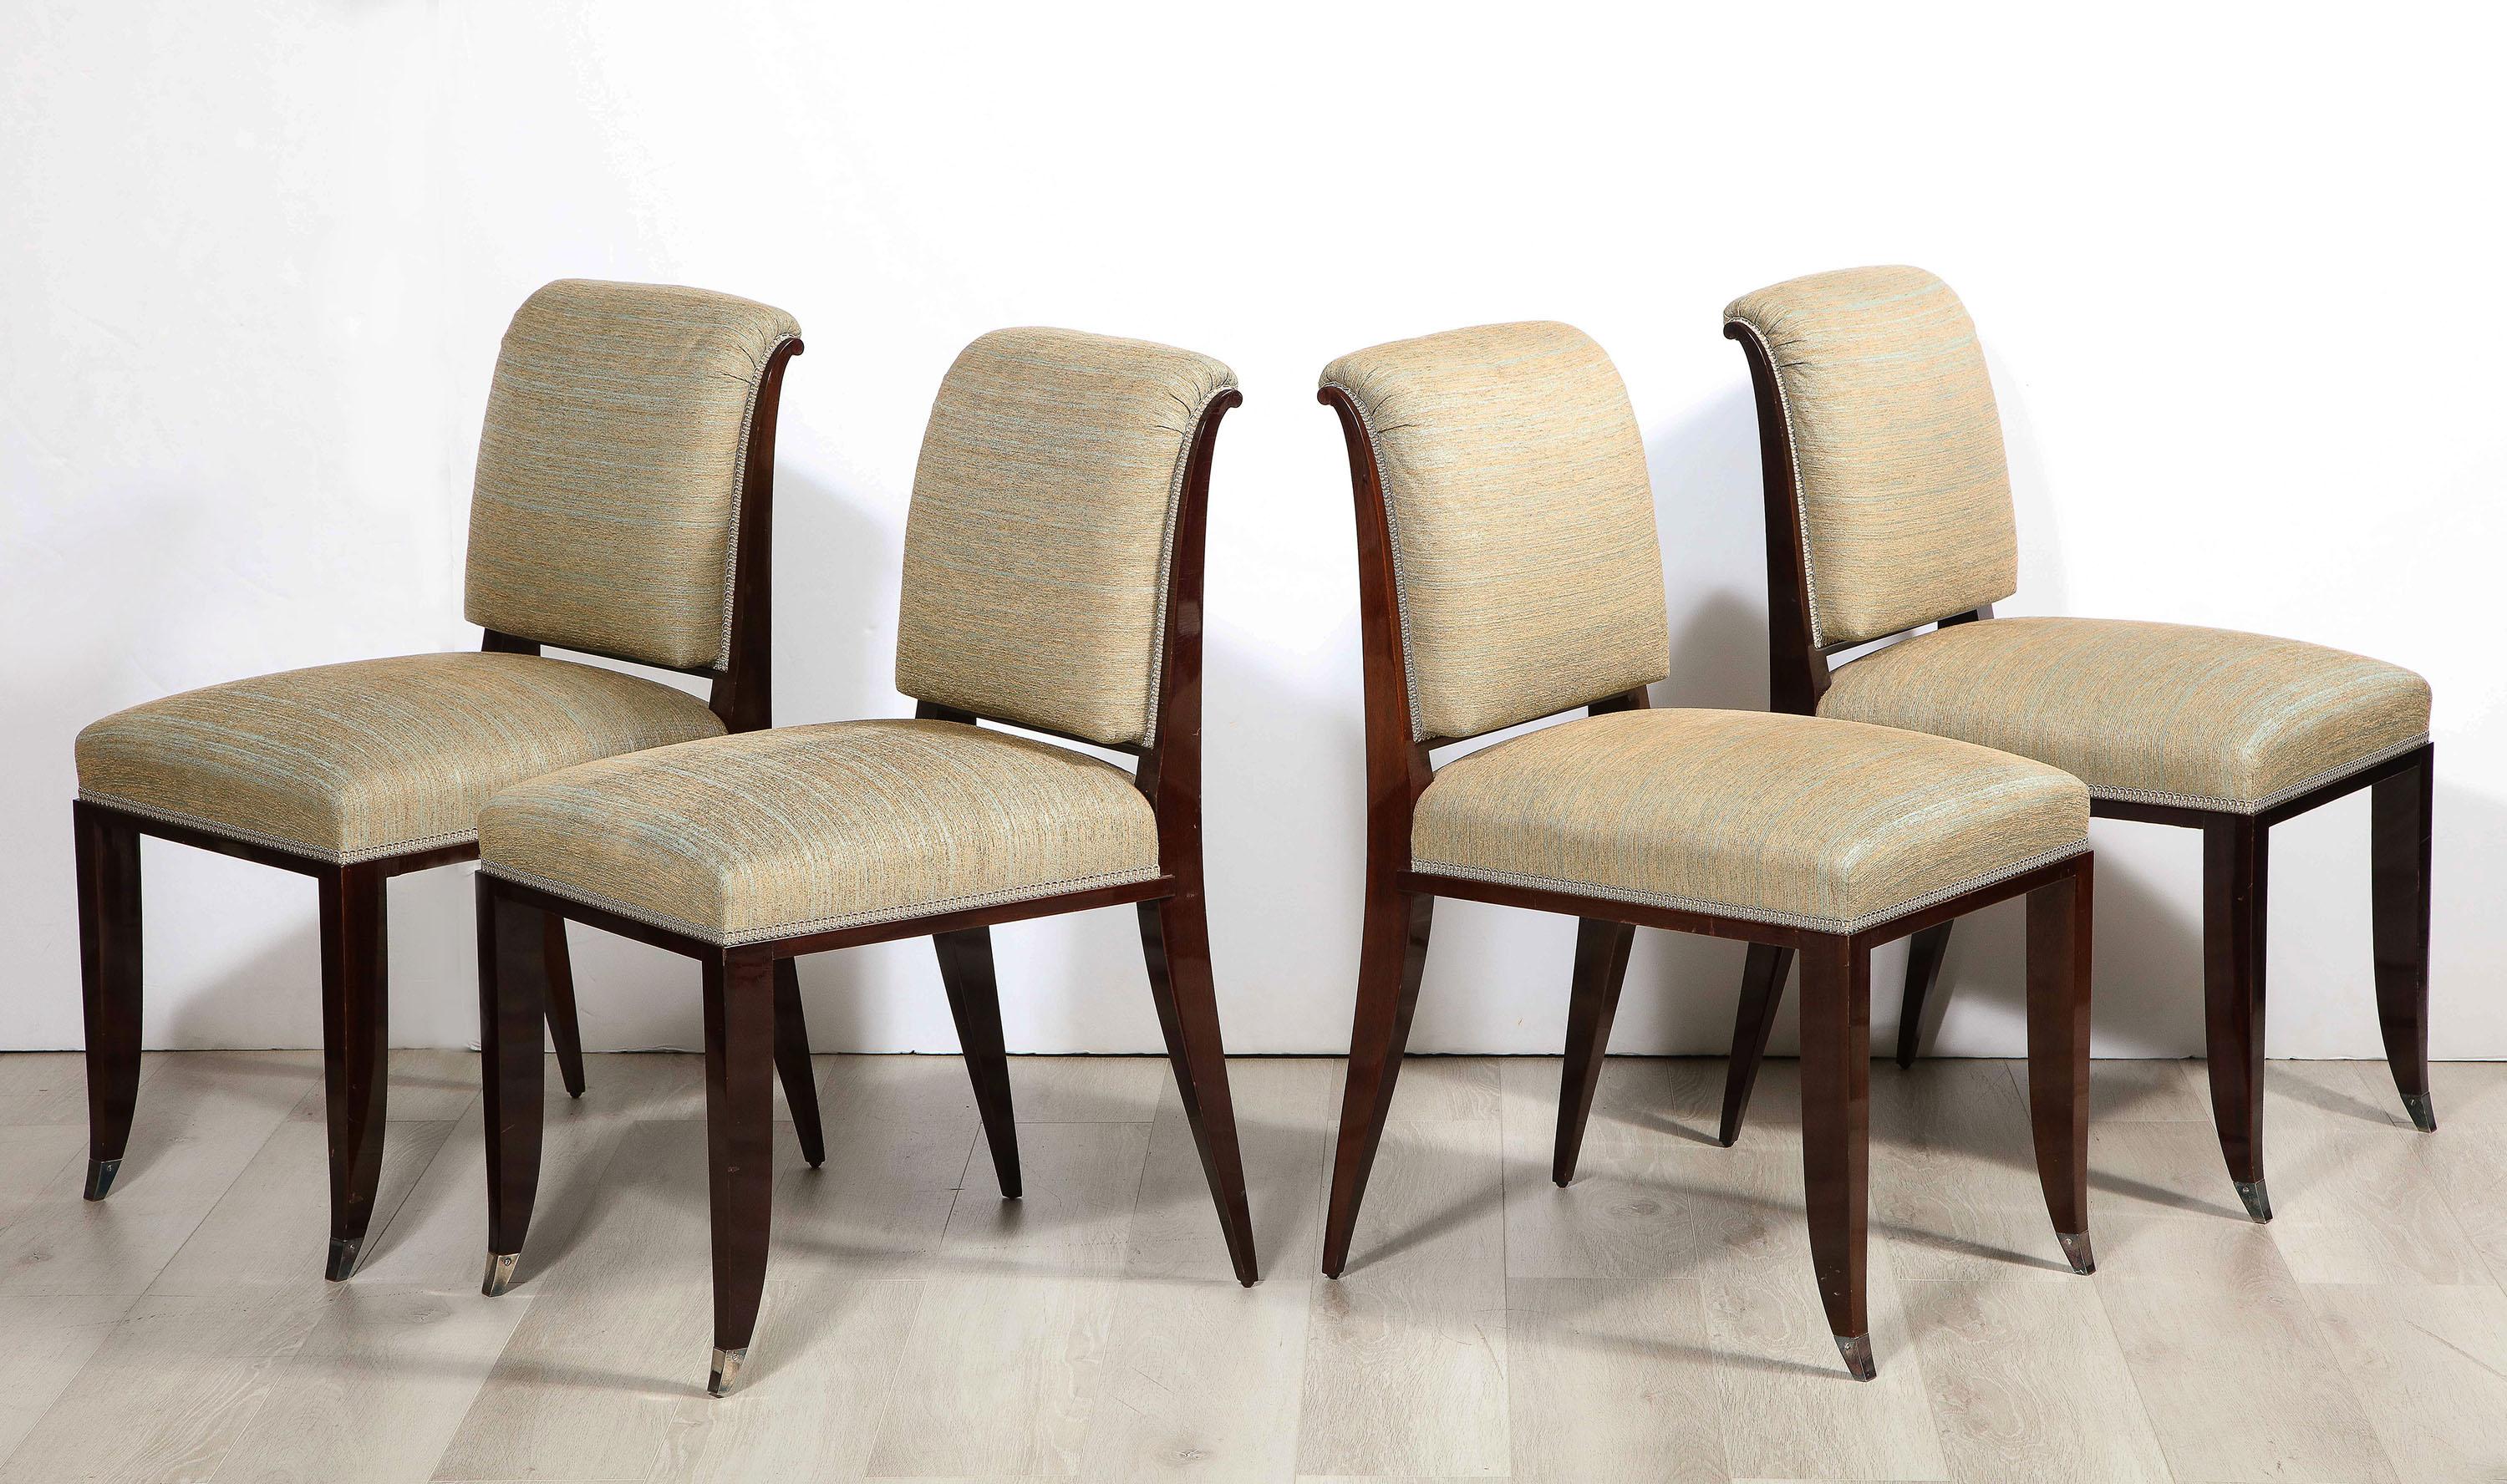 The four mahogany side chairs each with nickel sabots.